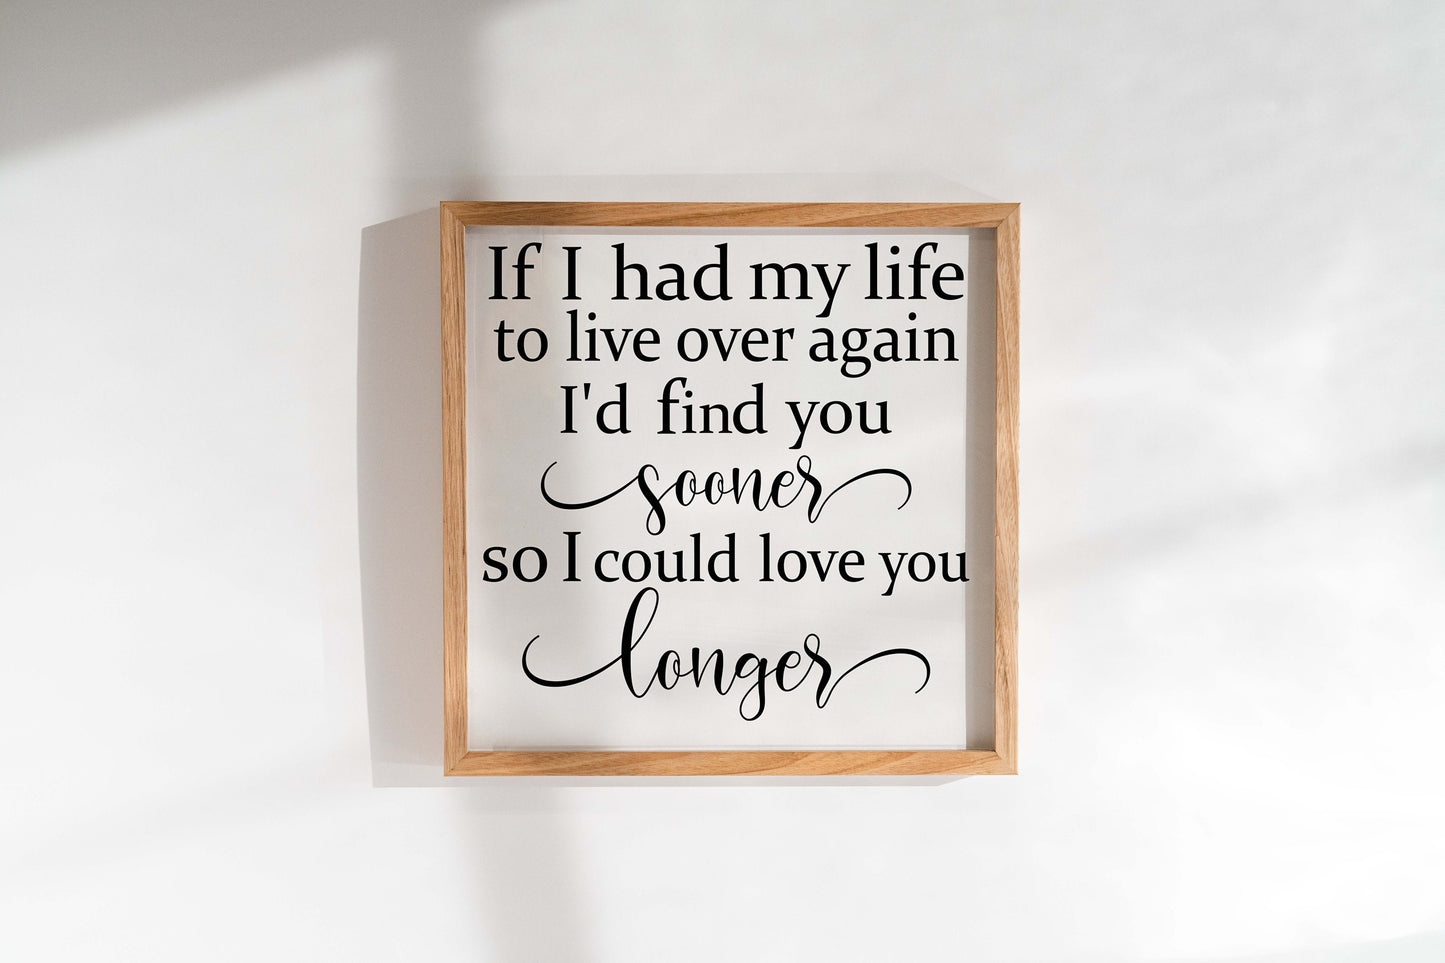 If I had my life to live over again I'd find you sooner bedroom wood sign.